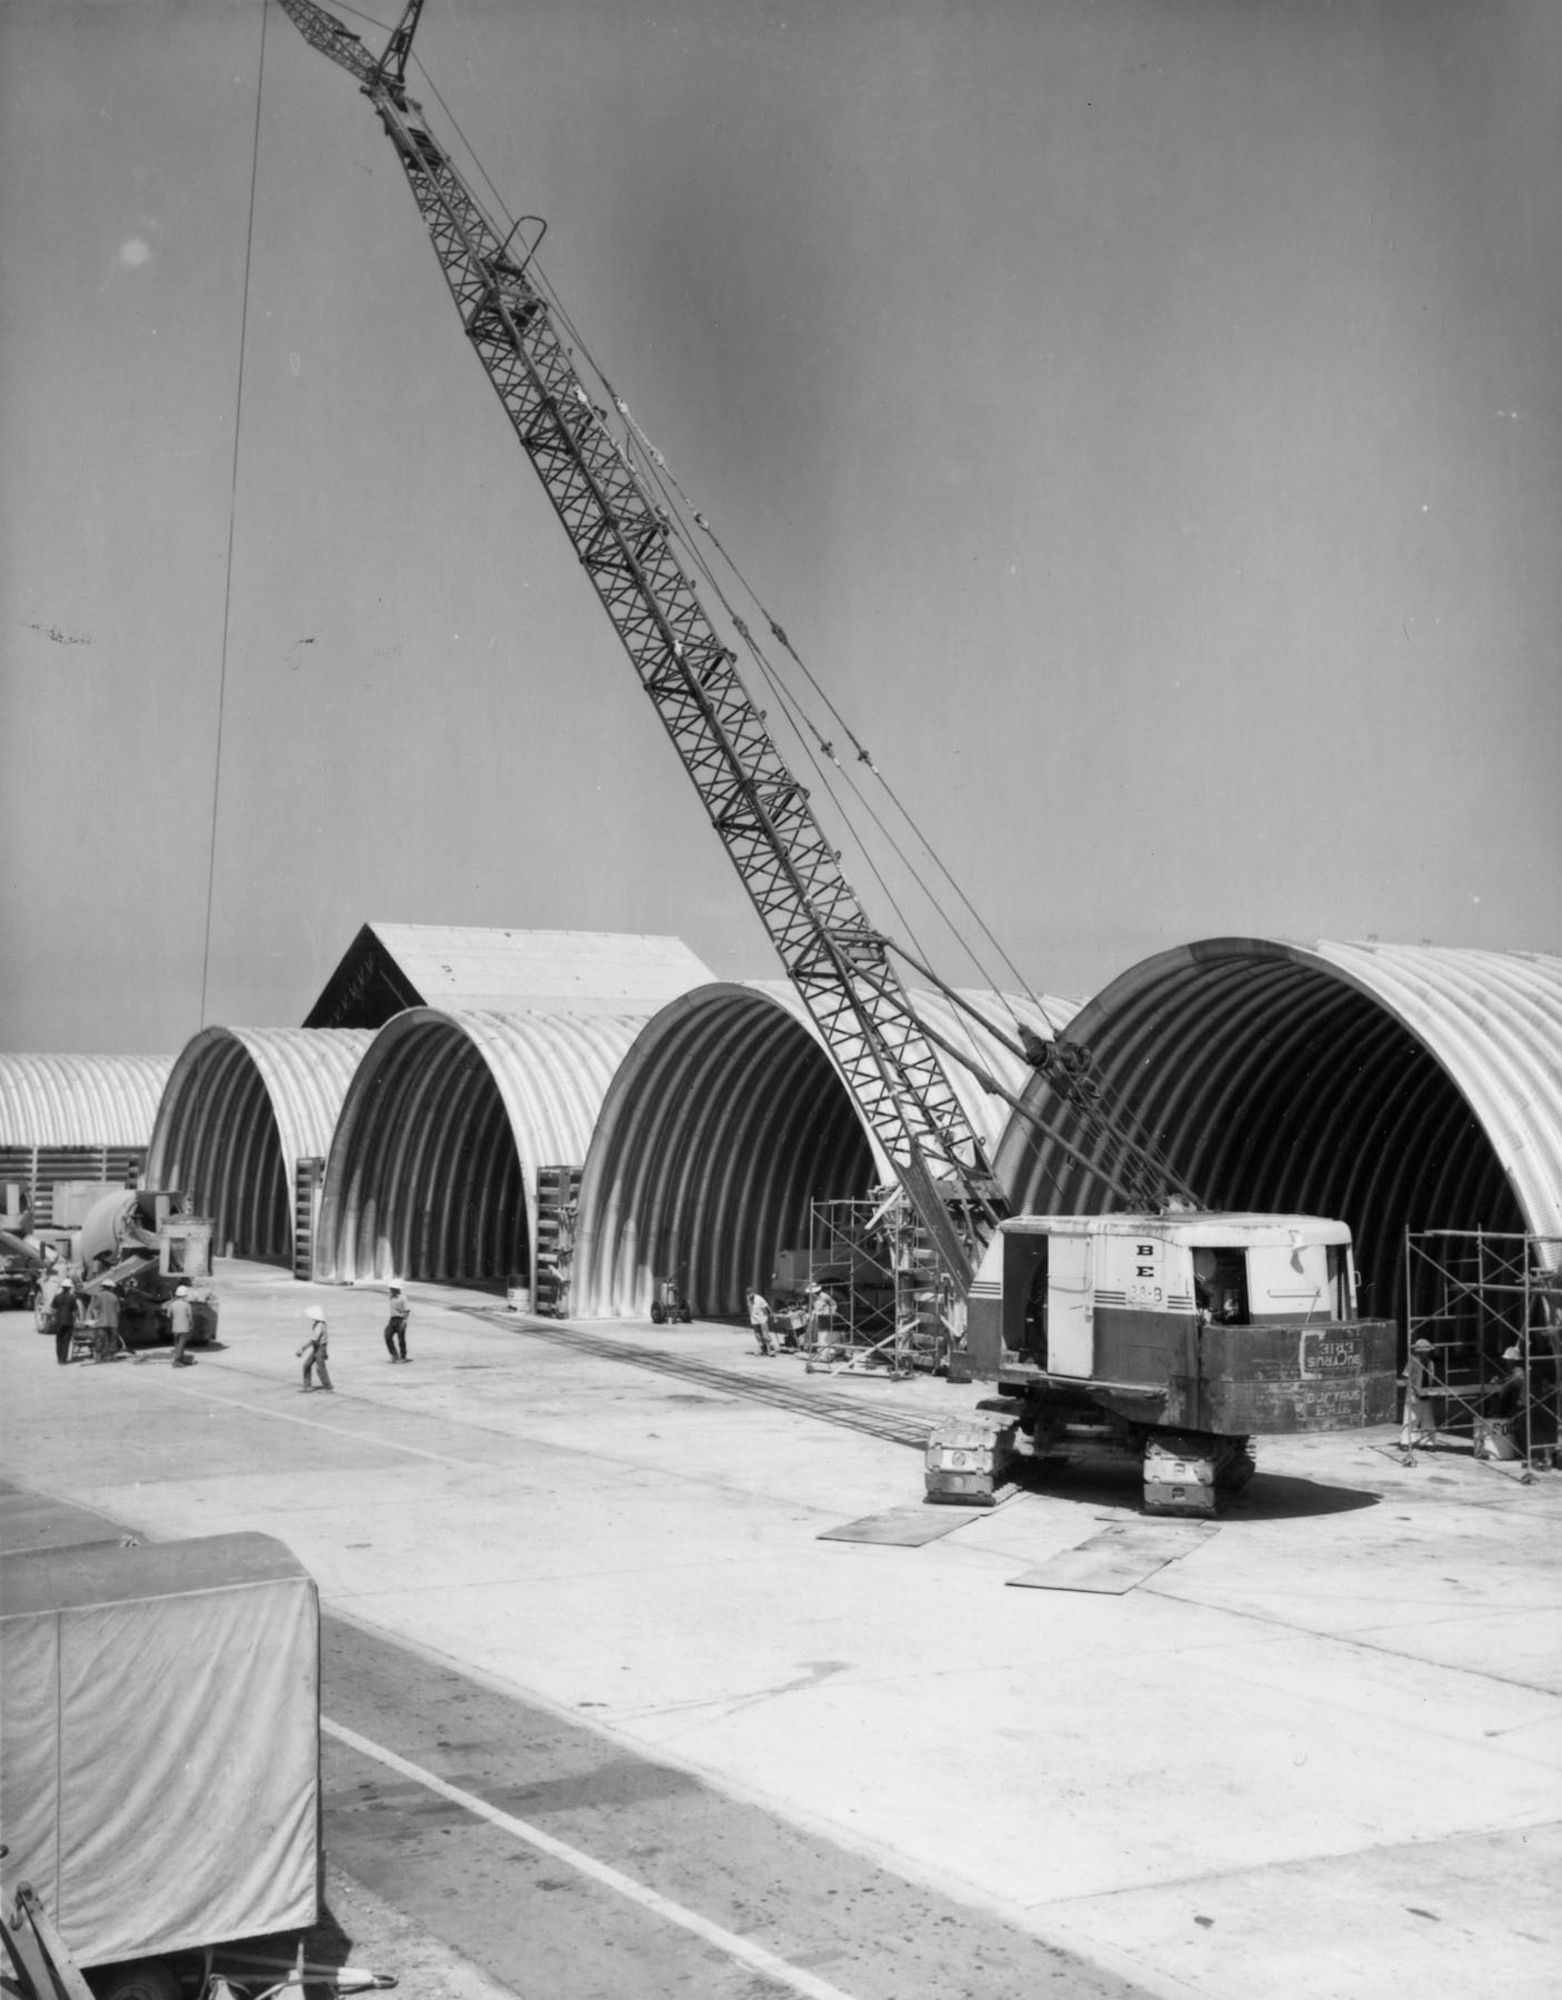 RED HORSE workers of the 820th Civil Engineering Squadron completing aircraft shelters at Da Nang AB, South Vietnam, in January 1969. These shelters housed USAF F-4 Phantoms of the 366th Tactical Fighter Wing. Eventually, RED HORSE engineers built nearly 400 aircraft shelters in Vietnam, most were covered by concrete for added protection. (U.S. Air Force photo)